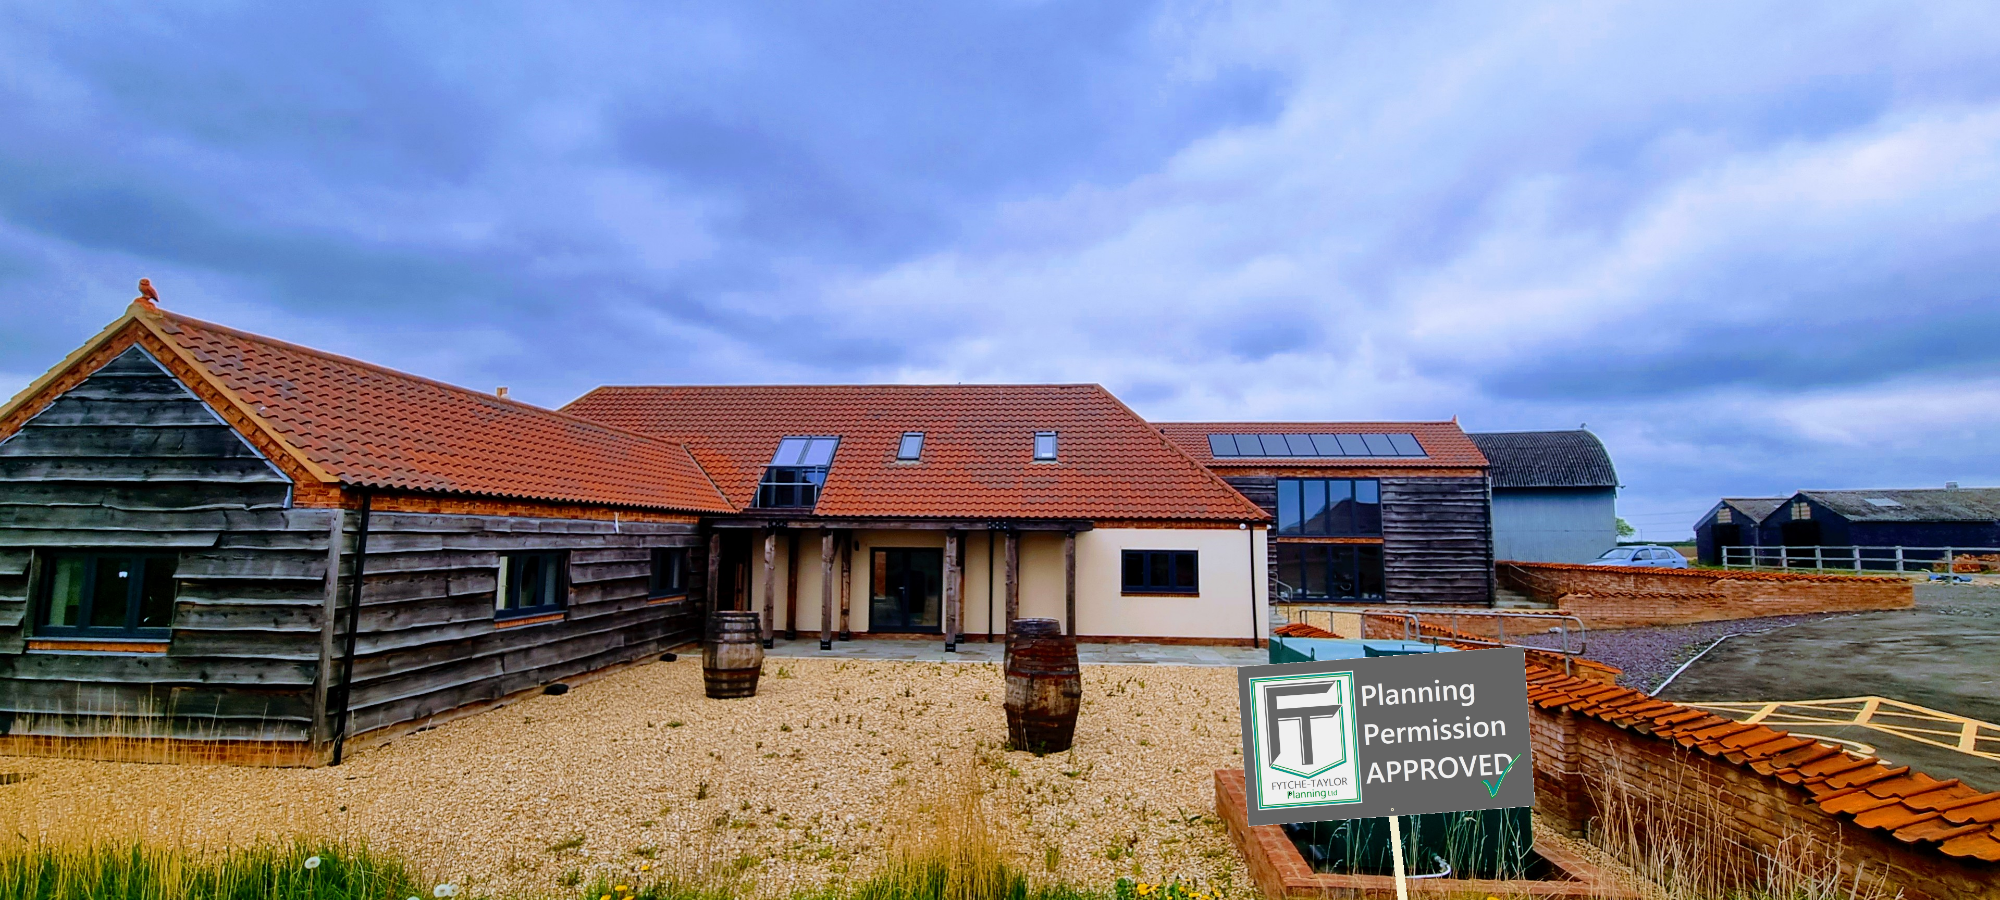 Plans approved for new homes, barn conversion, farm buildings and more! Contact us for planning advice and expert architectural design solutions.